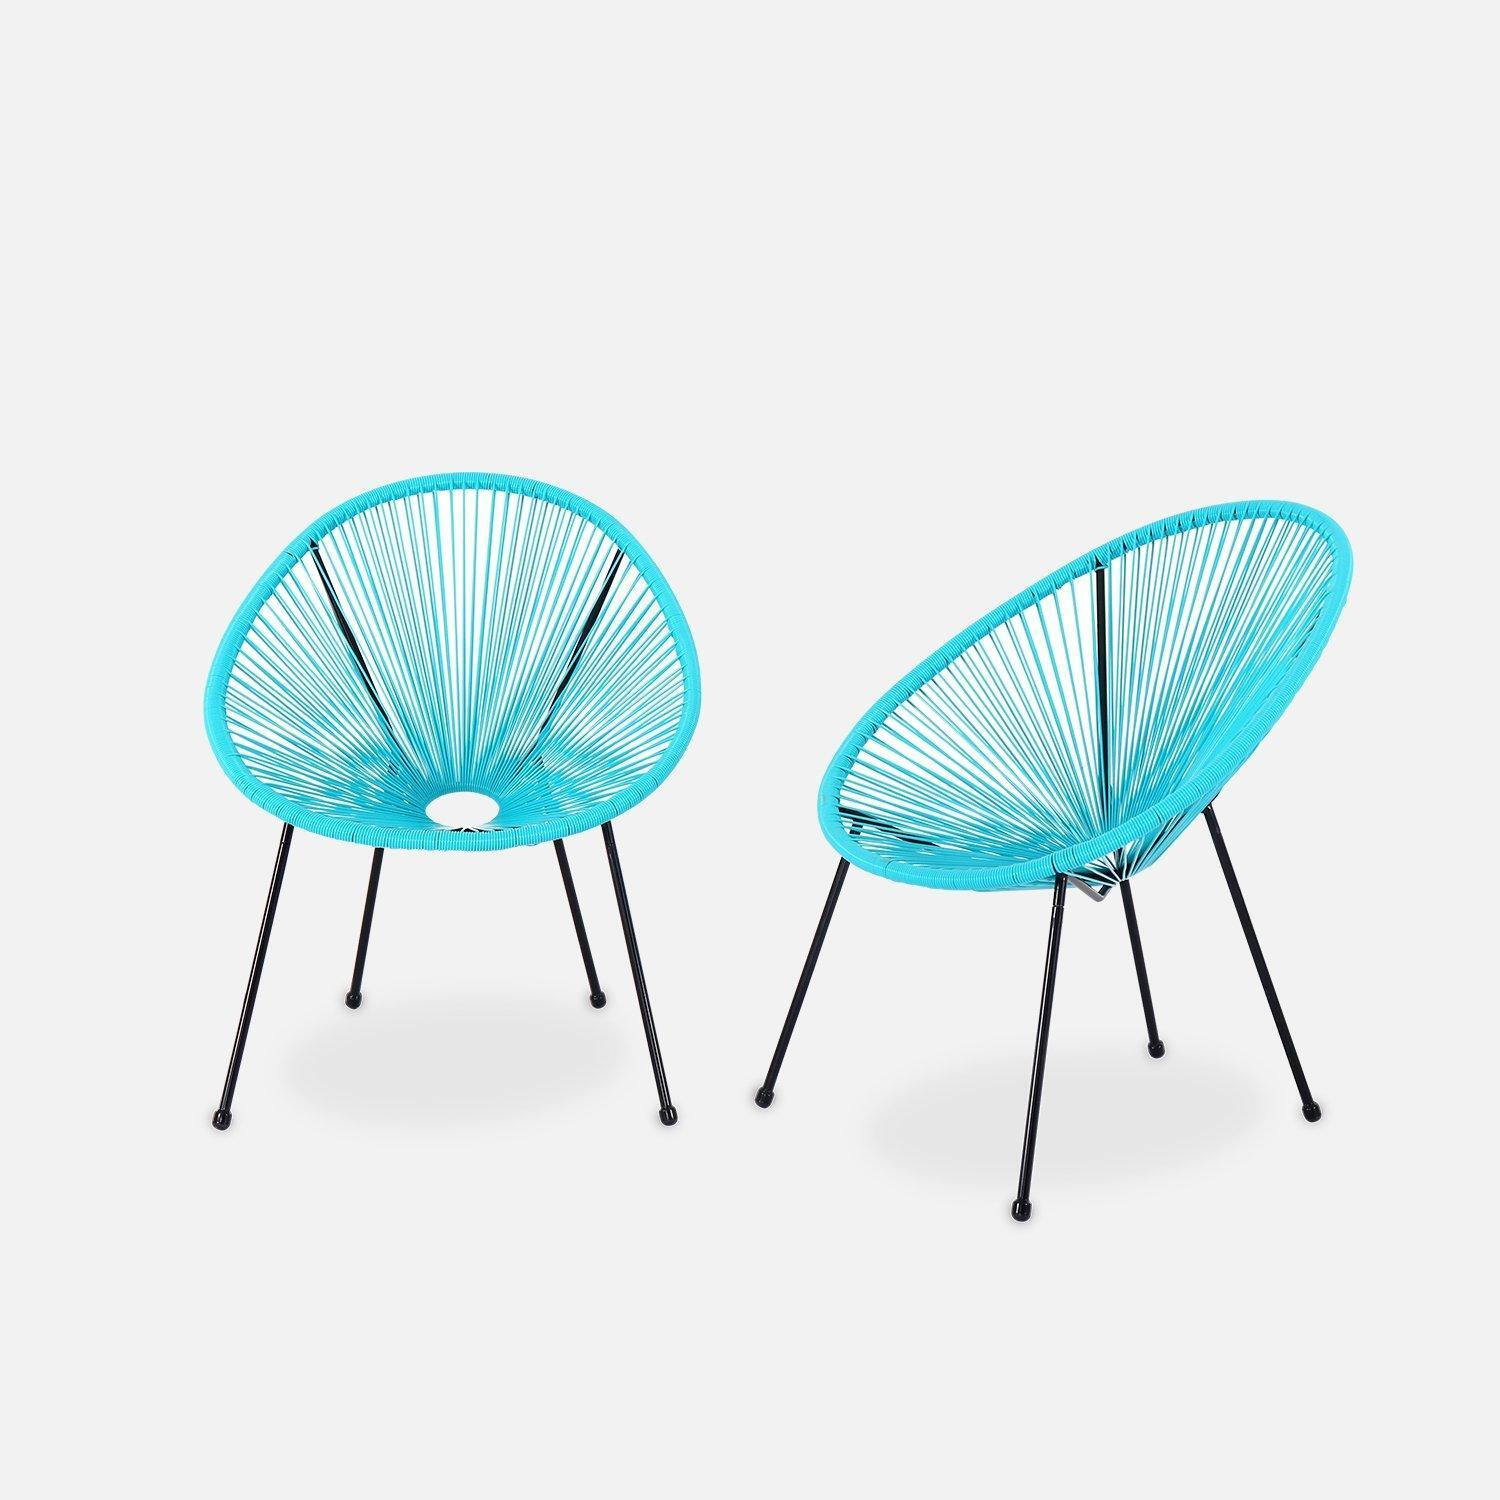 Pair Of Designer Egg-style String Chairs - image 1